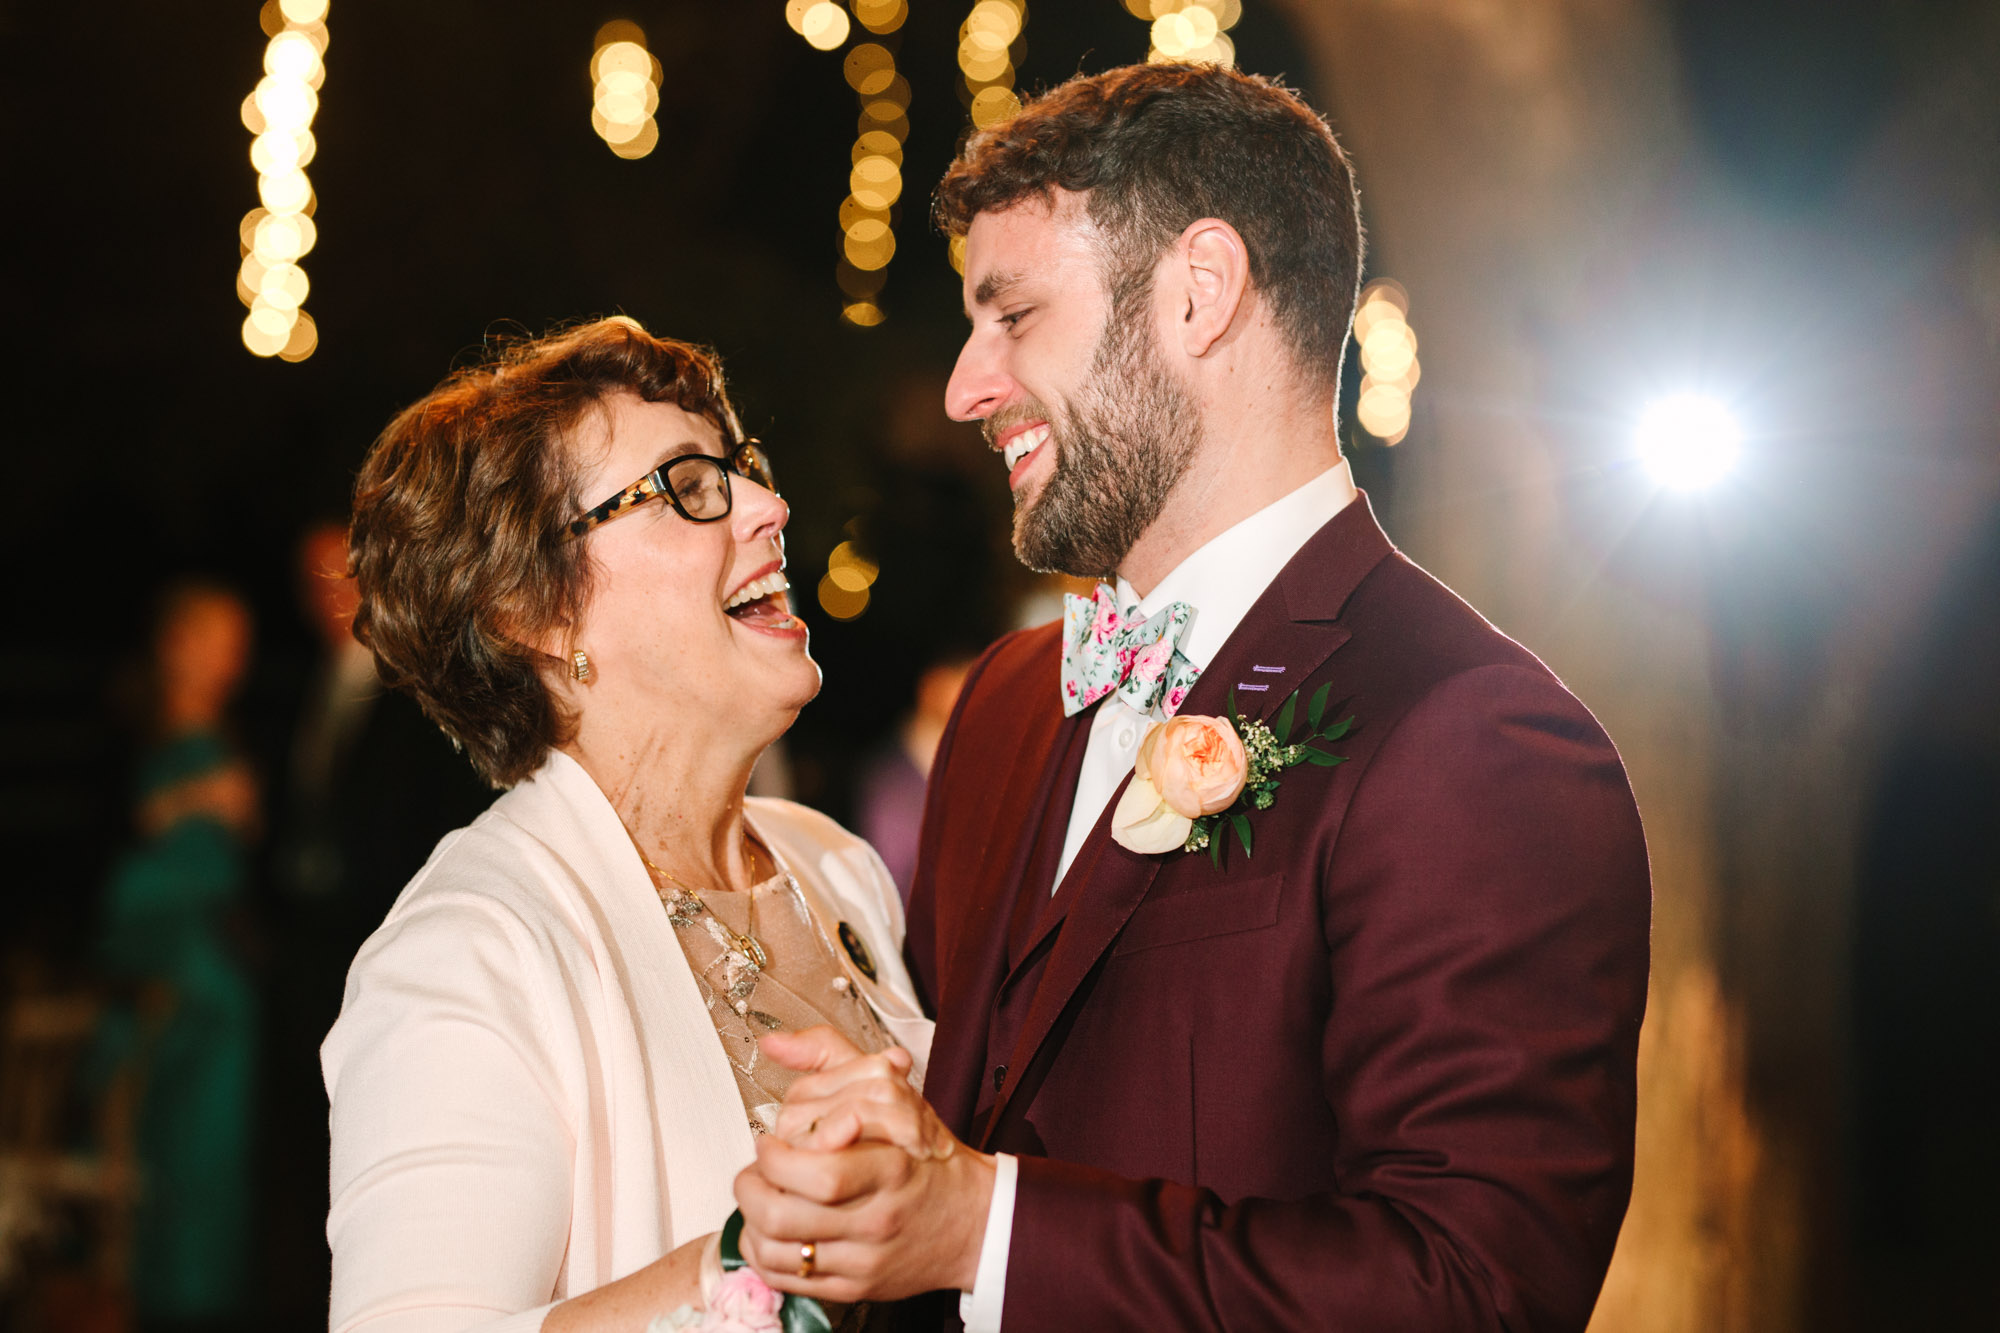 Mother-son dance at wedding by Mary Costa Photography